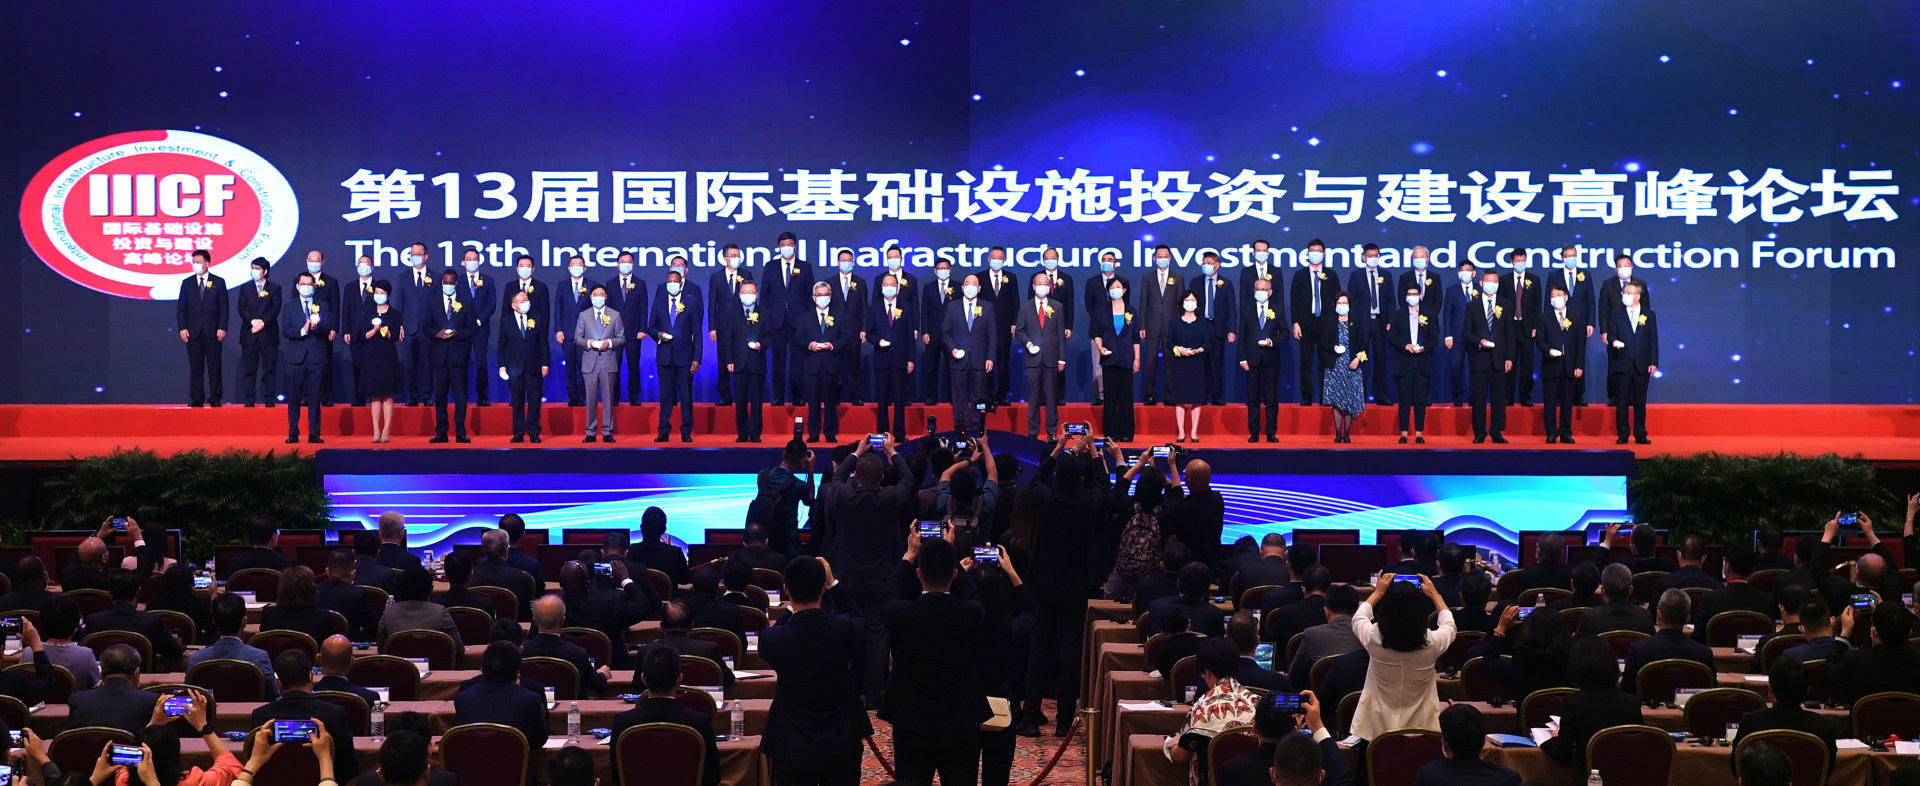 Guests pose for a picture at the opening ceremony of the 13th International Infrastructure Investment and Construction Forum on September 28, 2022 in Macao. Photo: Courtesy of IIICF